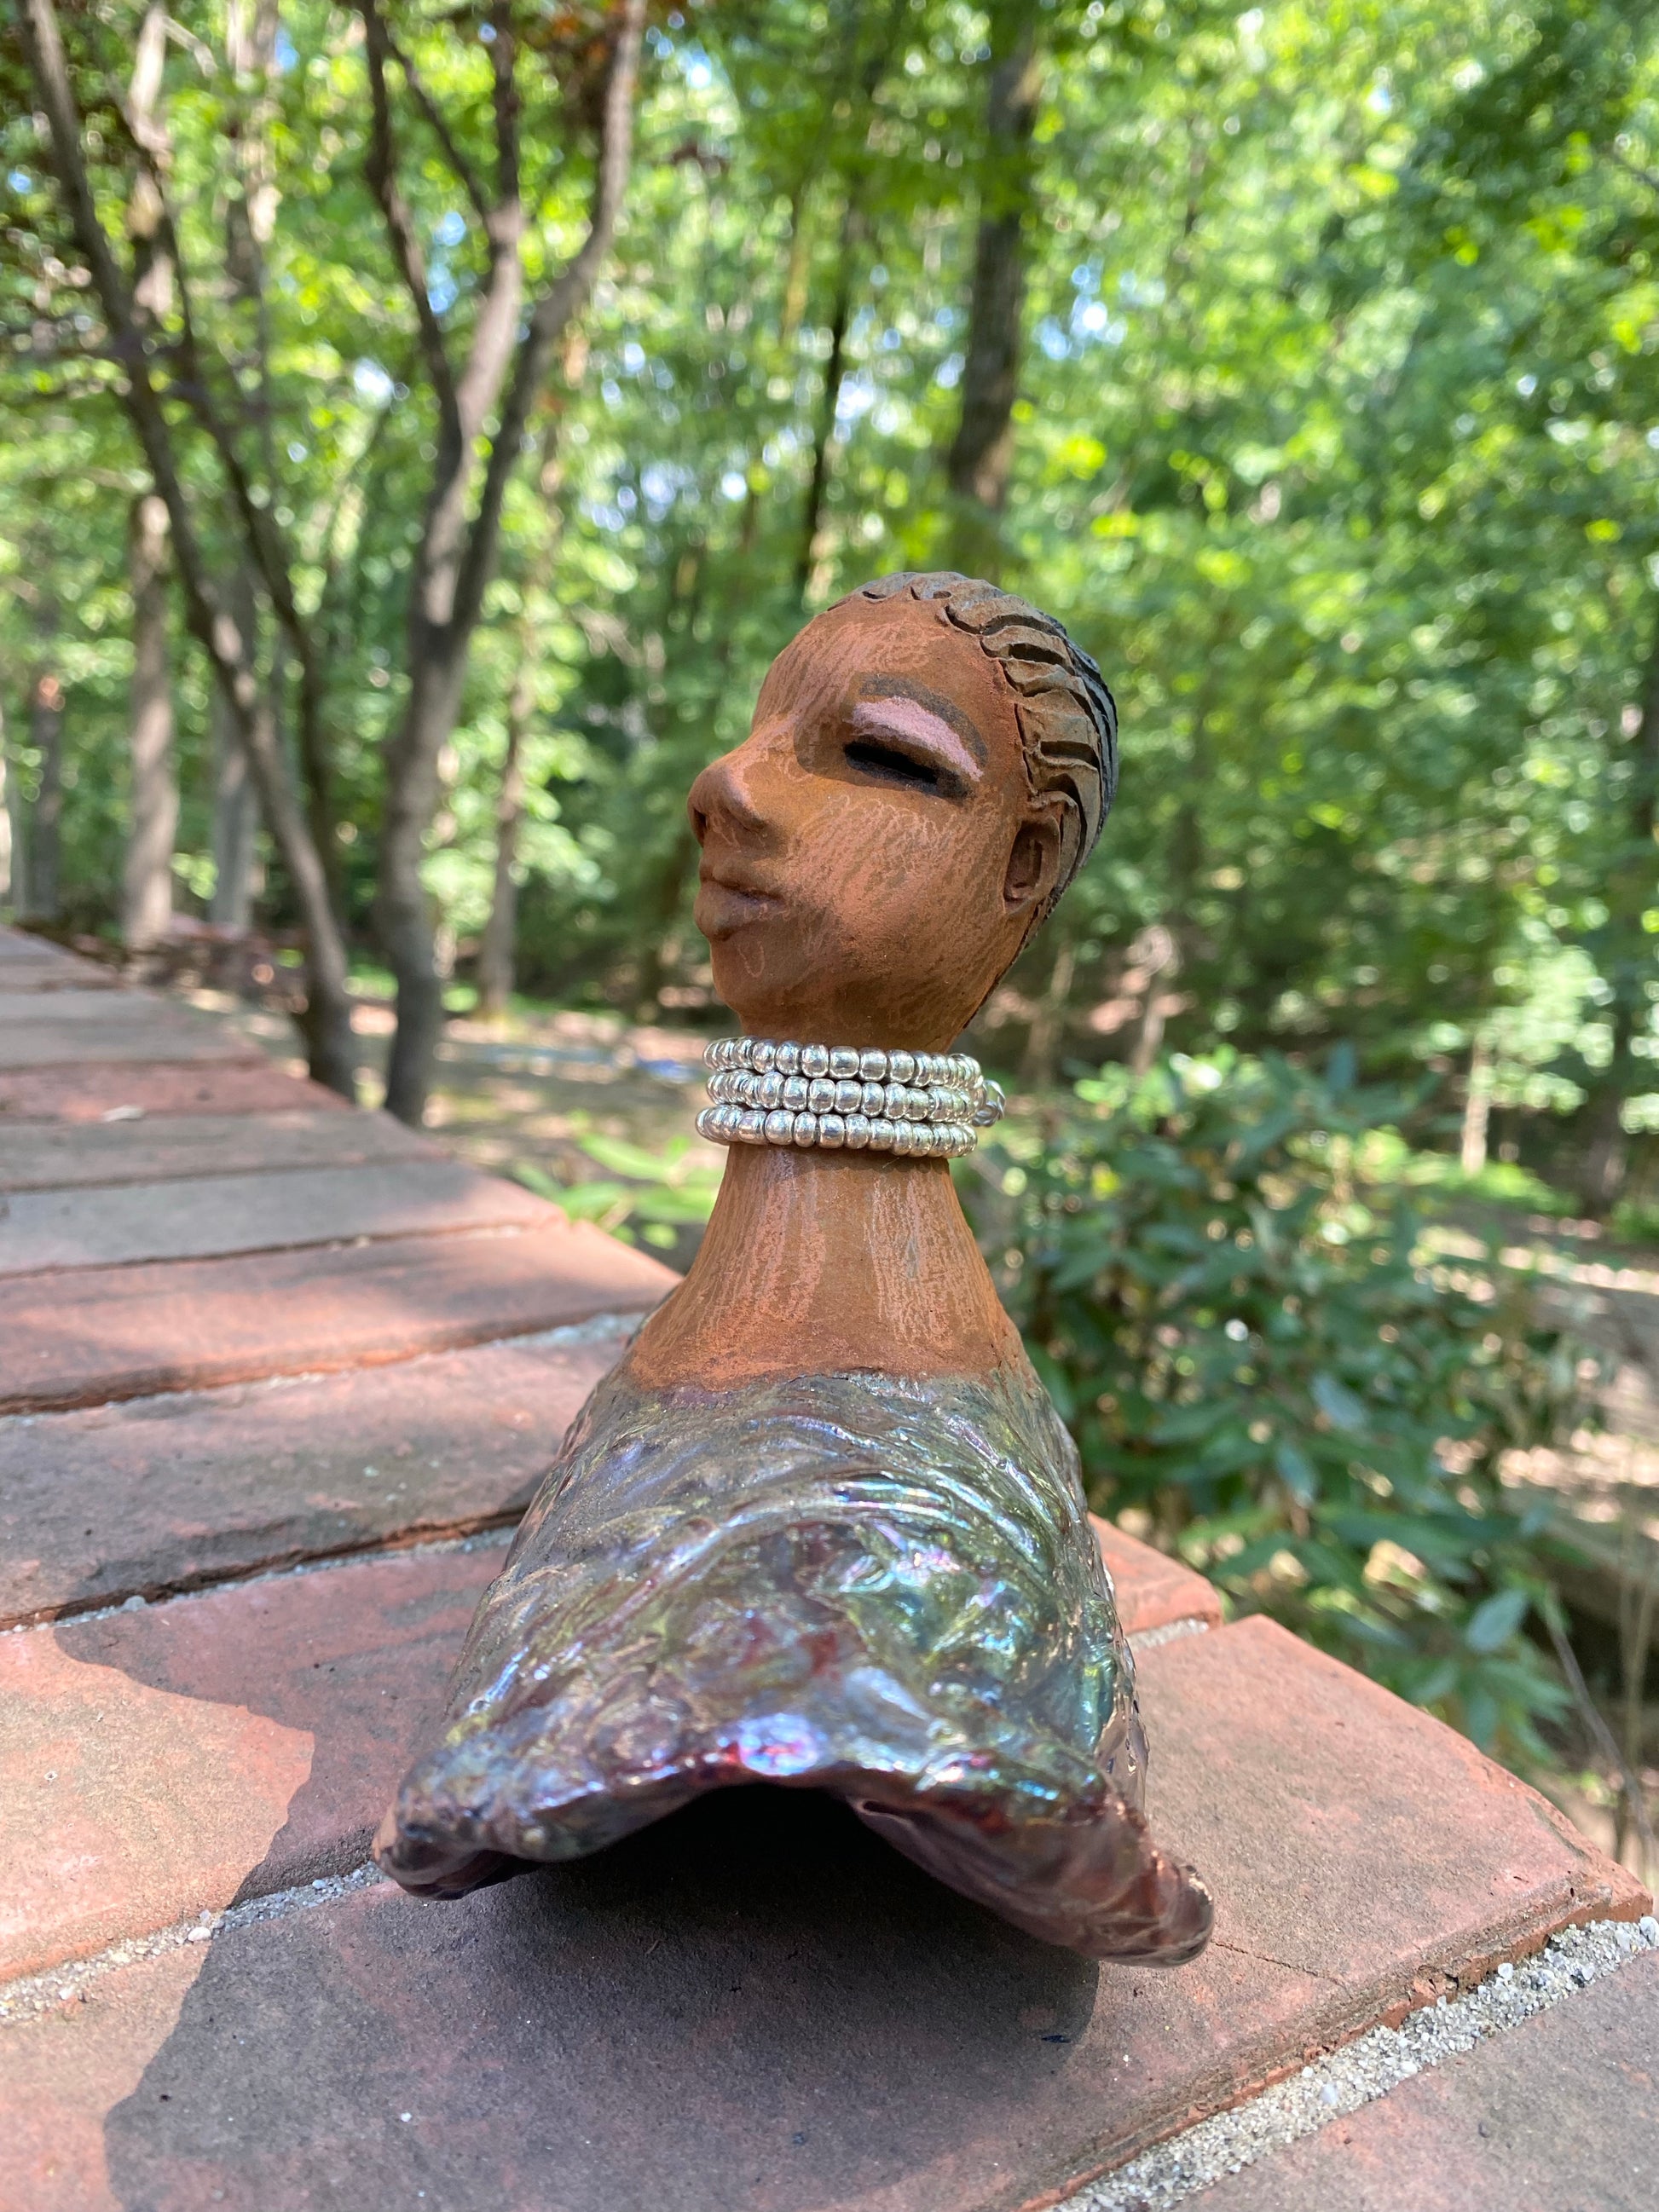 Belinda looks up with joy and anticipation! Belinda stands 6" x 8" x 4" and weighs 1.40 lbs. She has a beautiful textured copper robe trim. Belinda has braided clay hair. She has a honey brown complexion and soft light brown lips. Belinda will make for great conversation in your home.